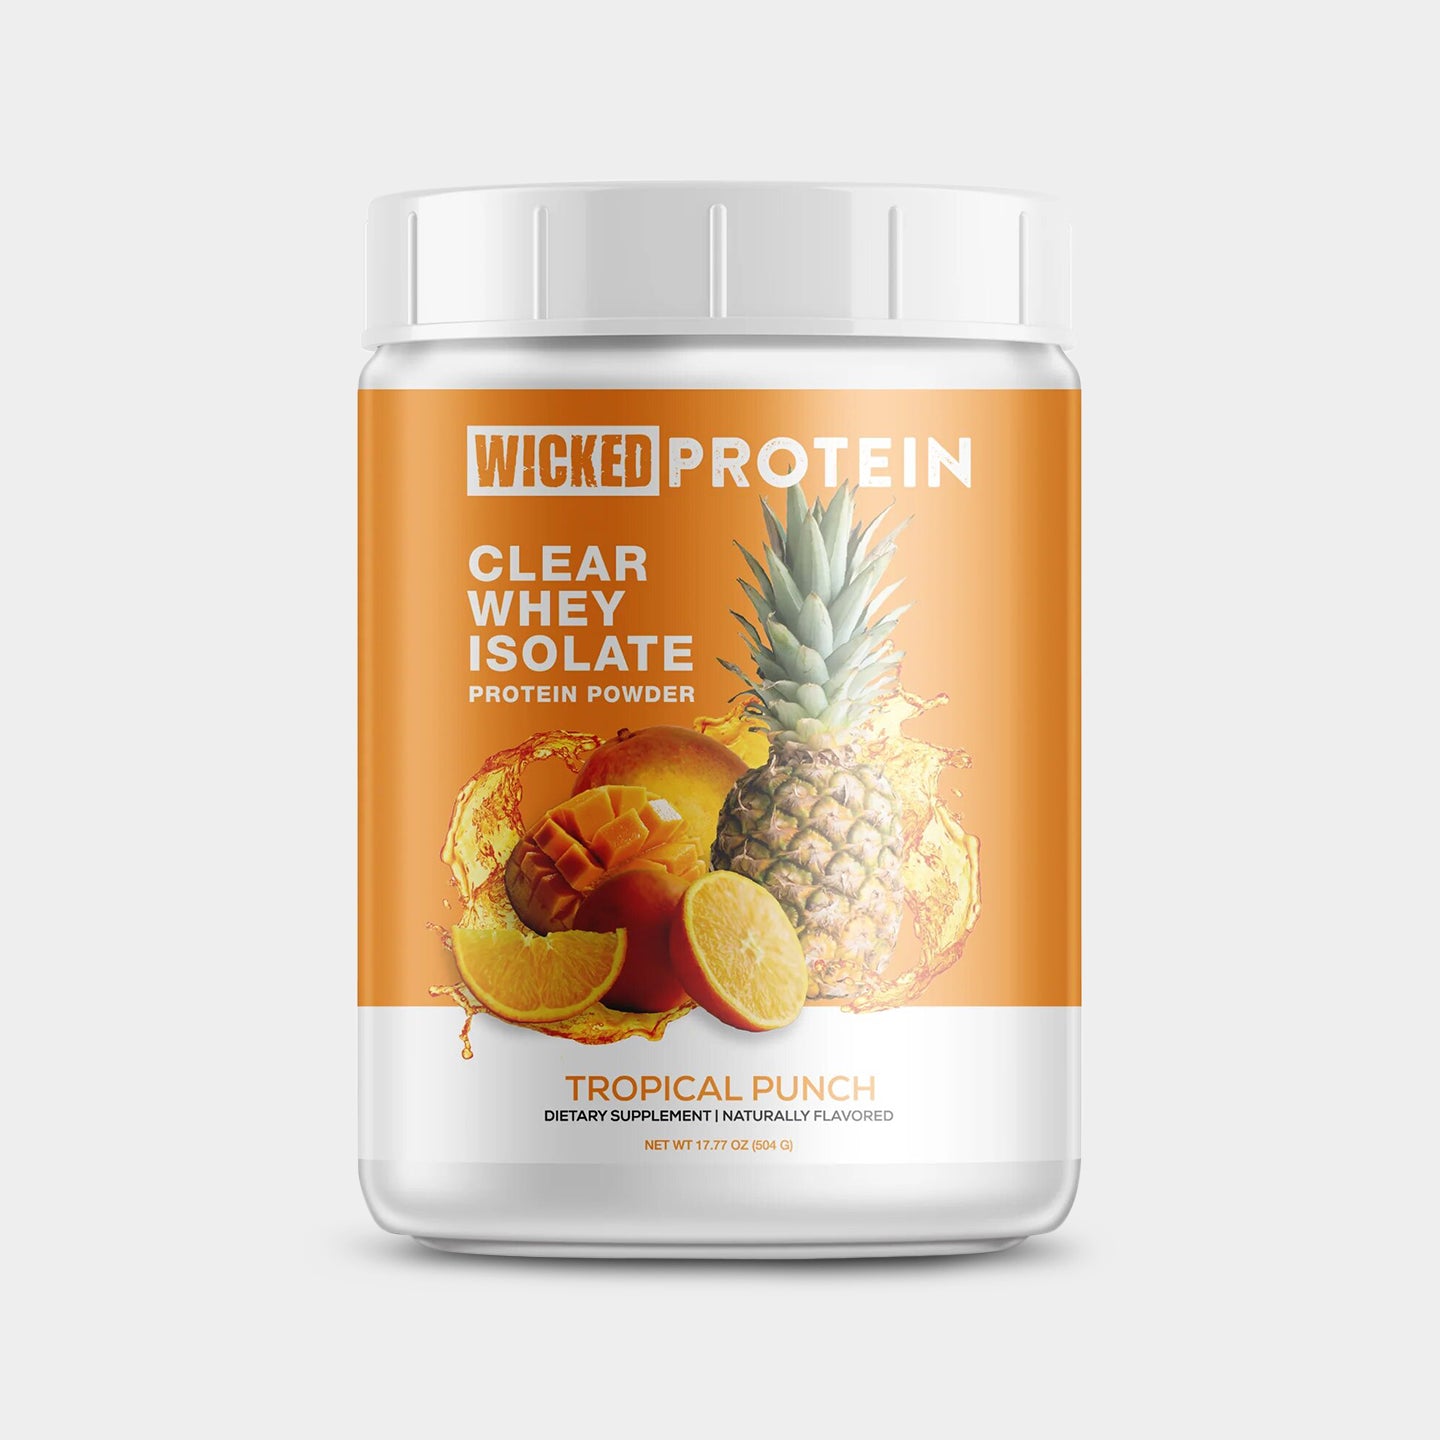 Wicked-Protein-Tropical-Punch-grey-main